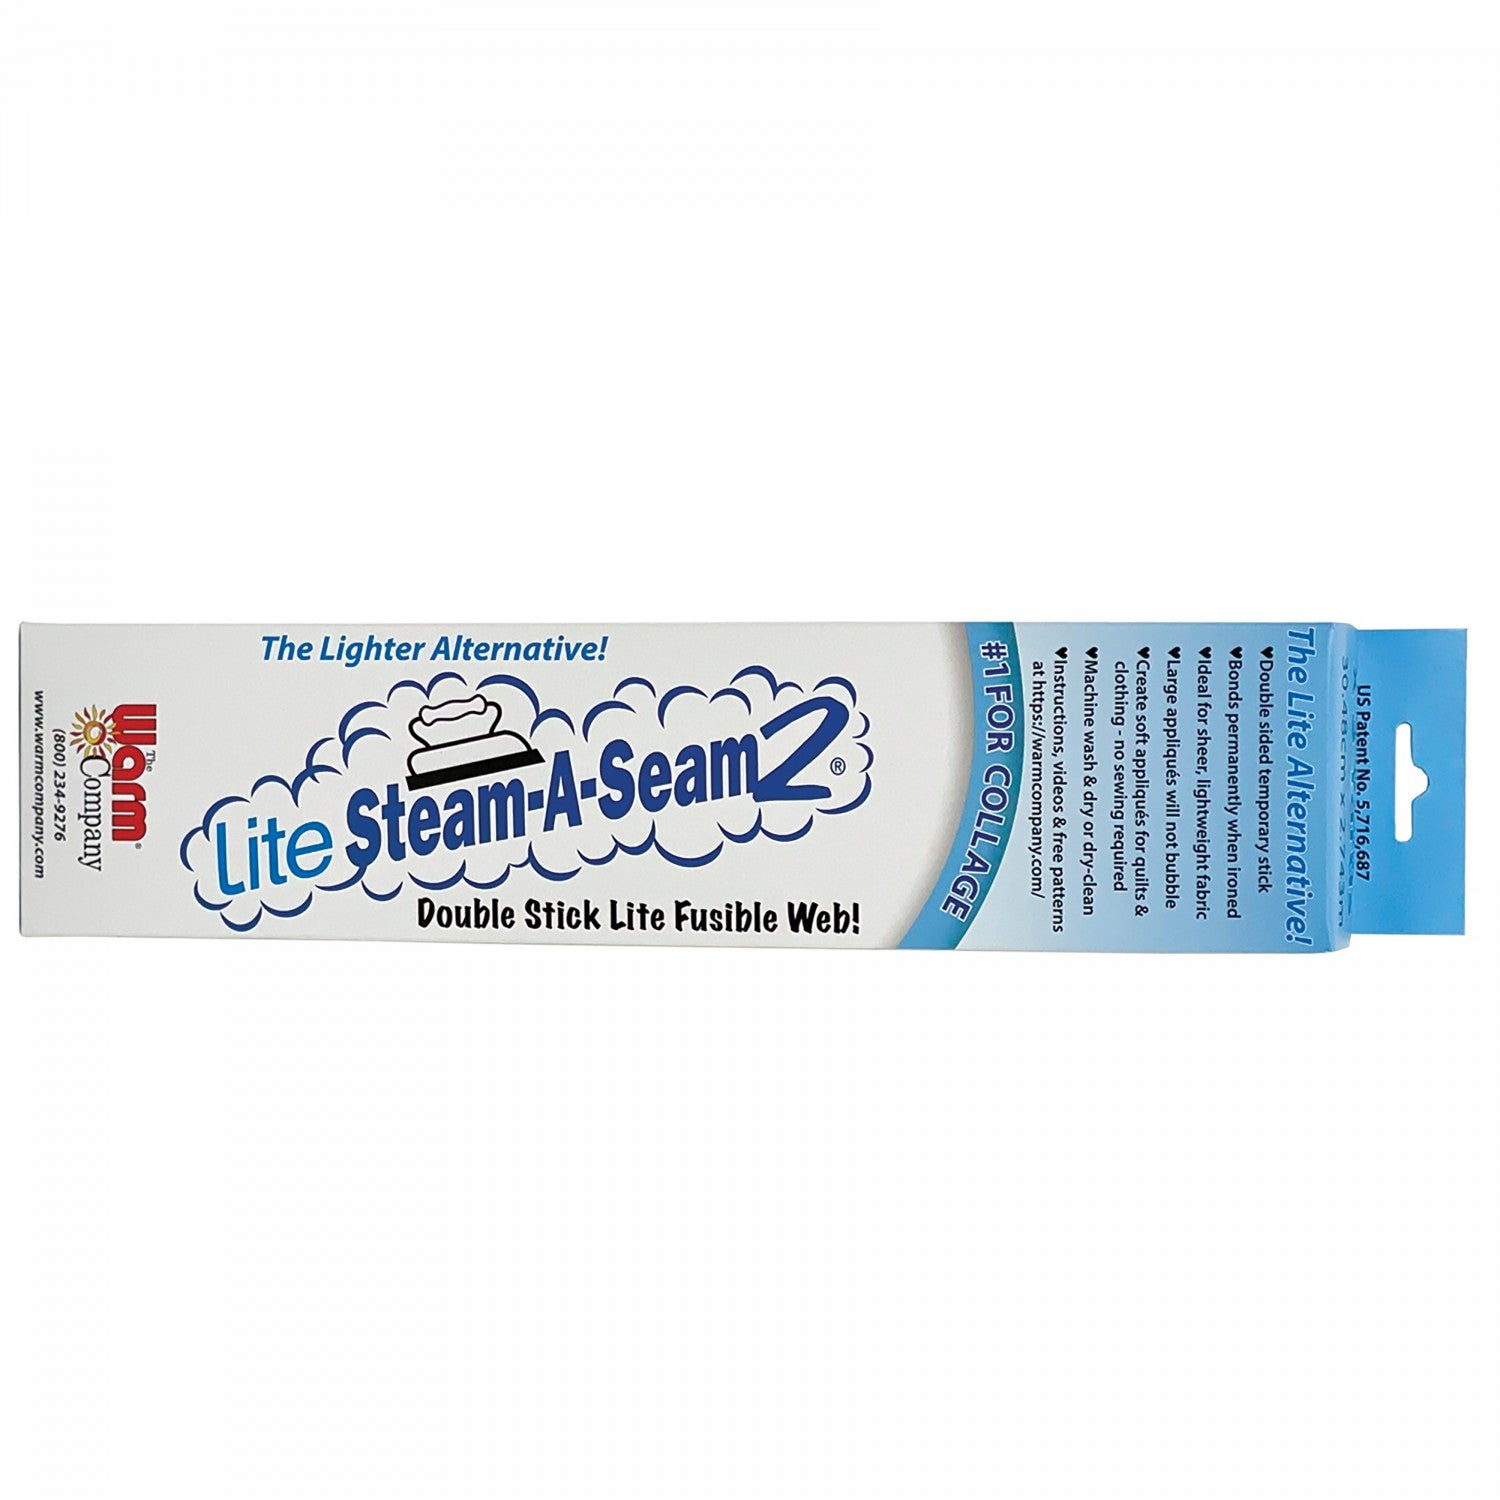 Lite Steam-A-Seam 2 Double Stick Fusible Web 12in x 3yds from Warm Company